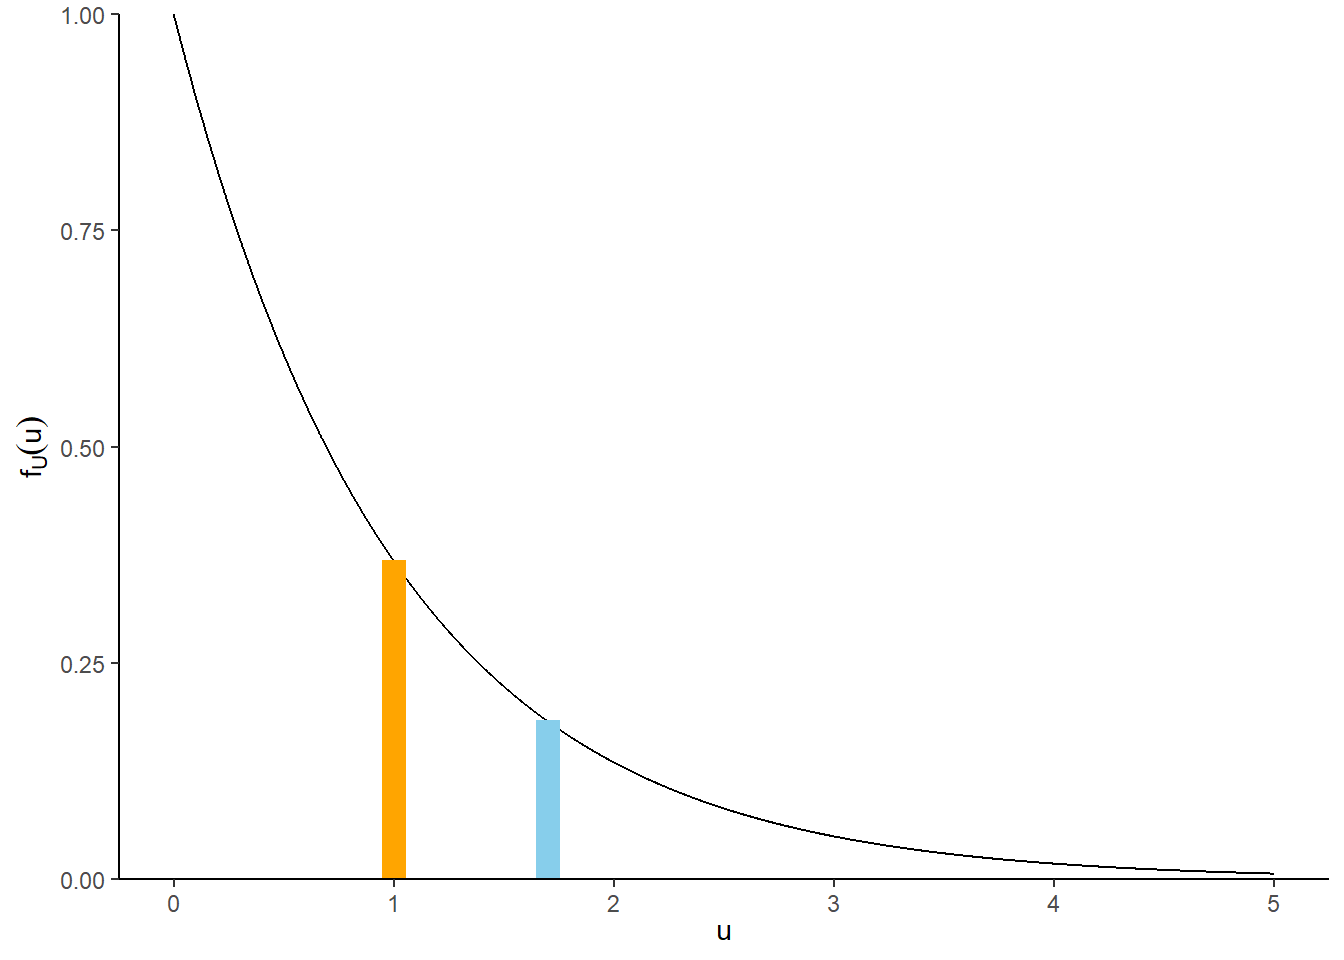 Illustration of \(P(1<U<2.5)\) (left) and \(P(0.995<U<1.005)\) and \(P(1.695<U<1.705)\) (right) for \(U\) with an Exponential(1) distribution, with pdf \(f_U(u) = e^{-u}, u>0\). The plot on the left displays the true area under the curve over (1, 2.5). The plot on the right illustrates how the probability that \(U\) is “close to” \(u\) can be approximated by the area of a rectangle with height equal to the density at \(u\), \(f_U(u)\). The density height at \(u=1\) is twice as large than the density height at \(u=1.7\), so the probability that \(U\) is “close to” 1 is (roughly) twice as large as the probability that \(U\) is “close to” 1.7.